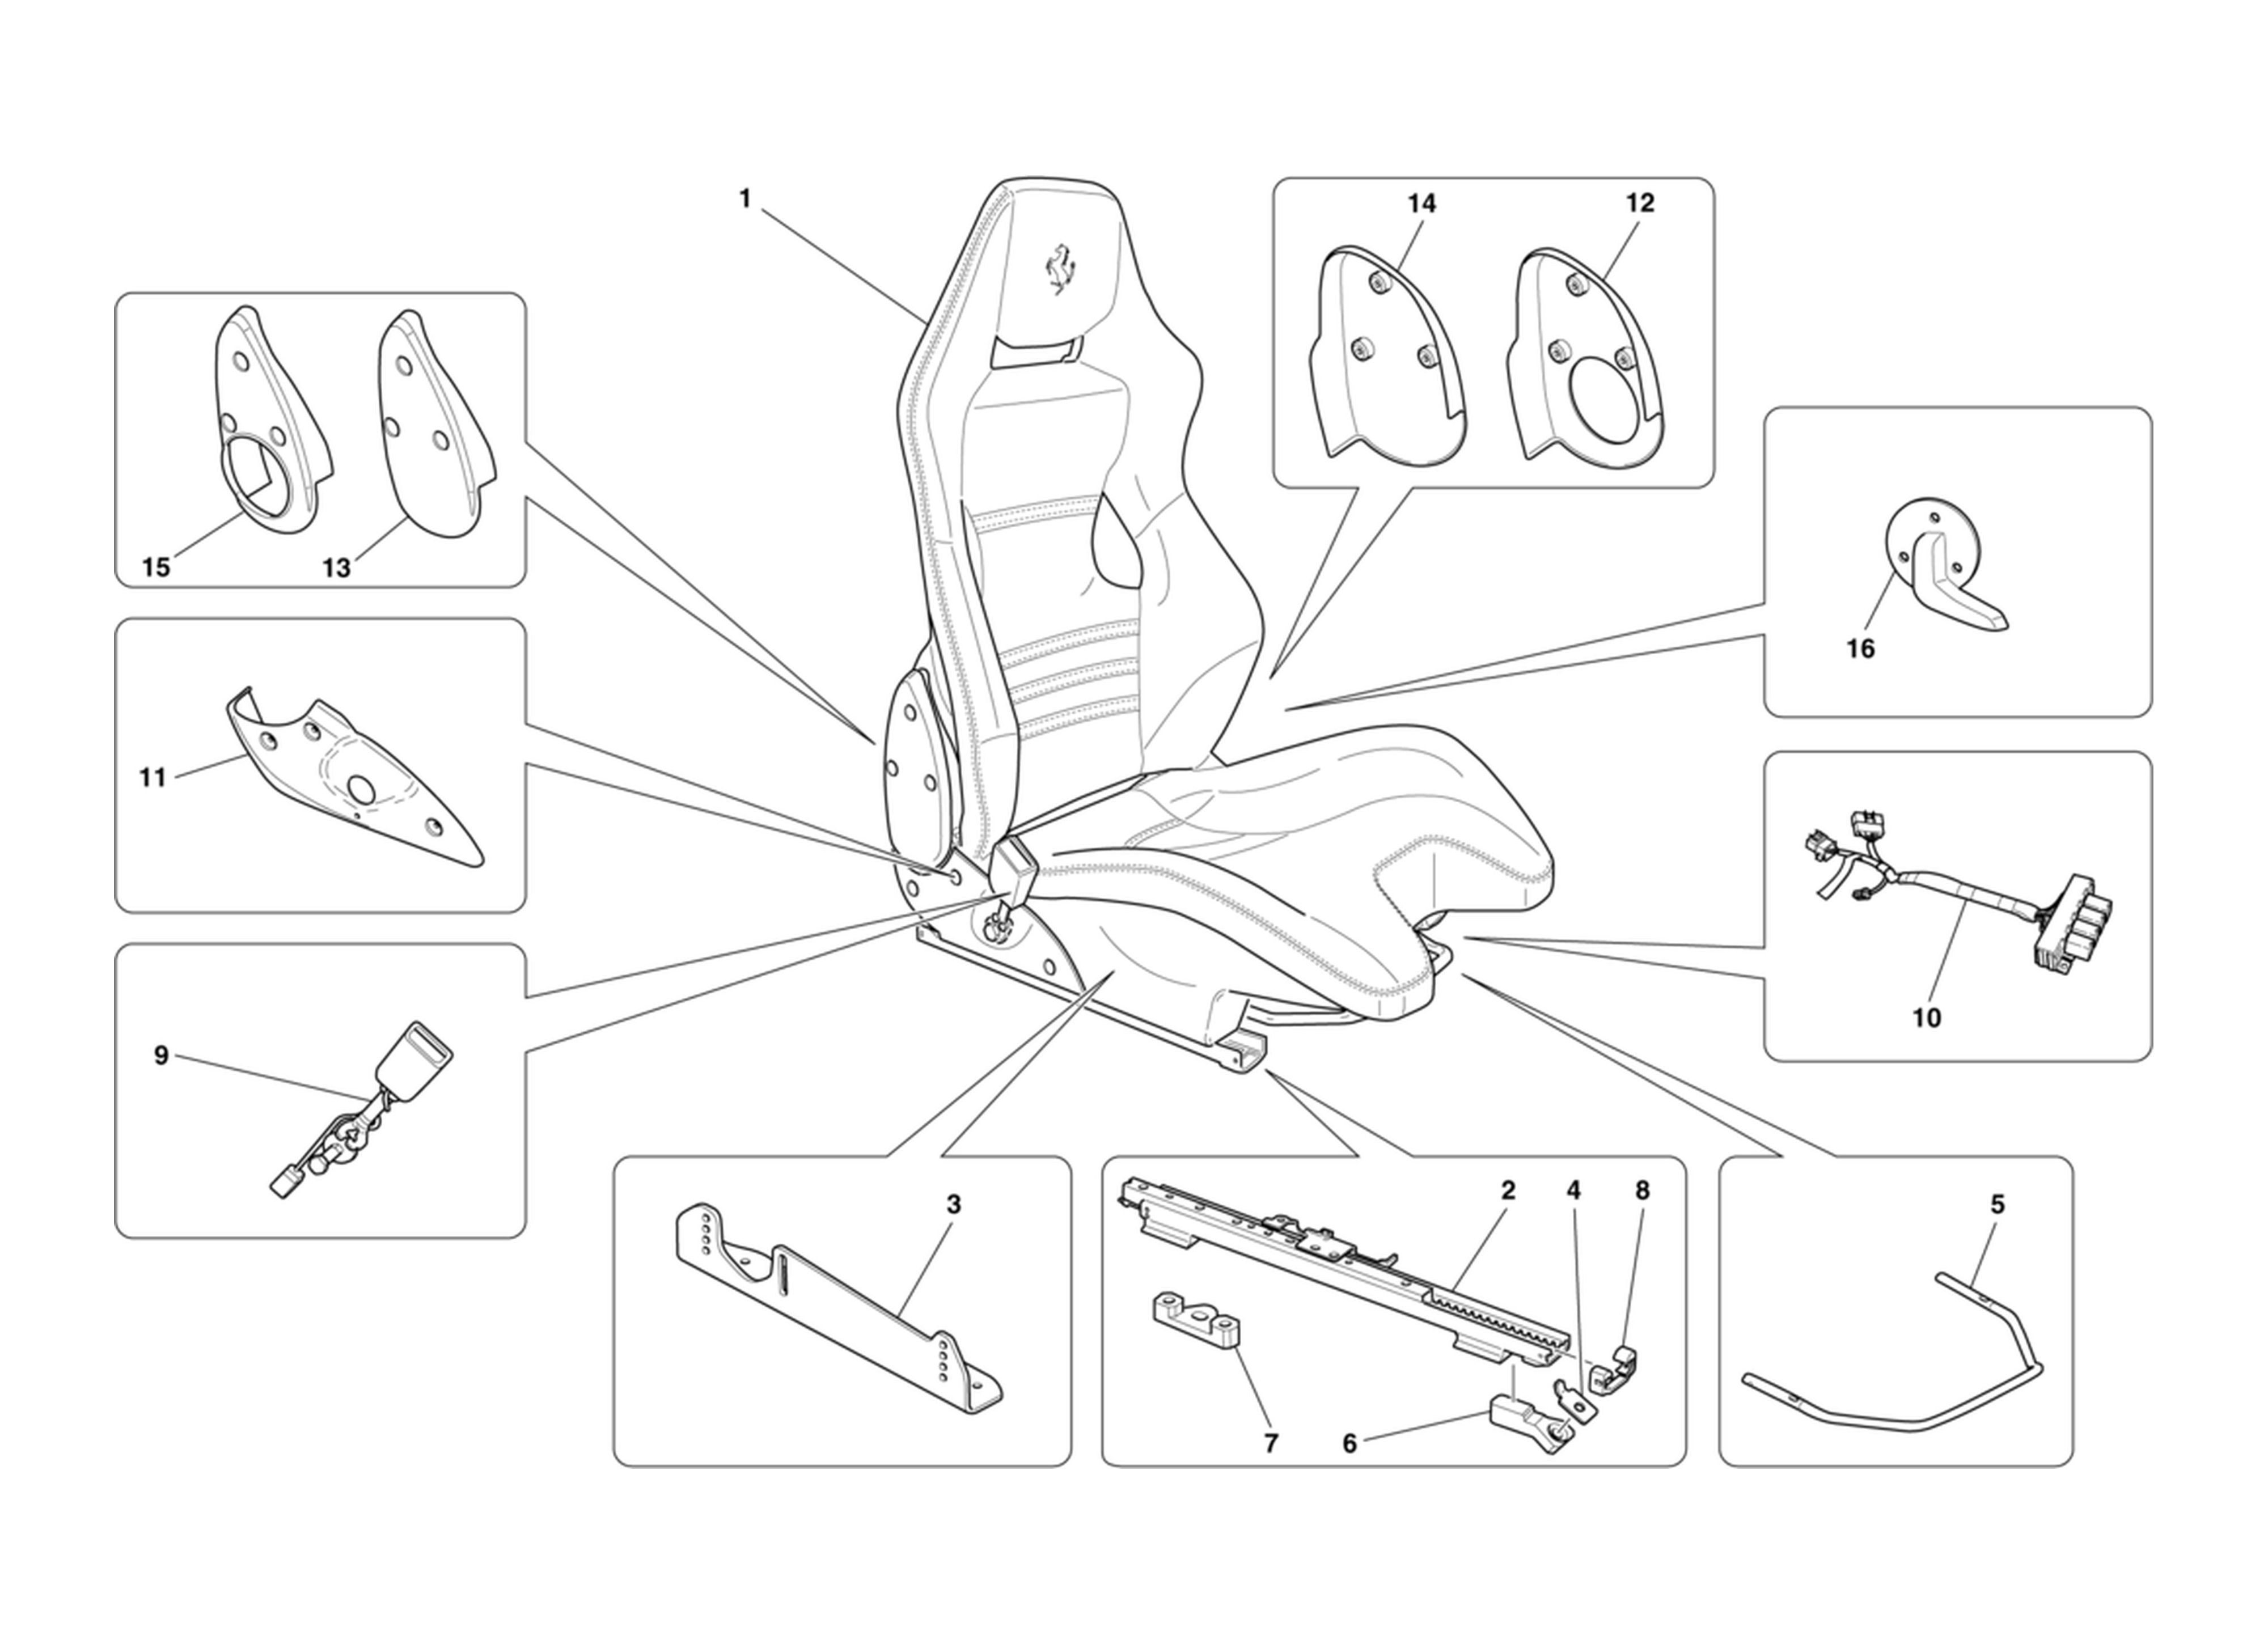 Schematic: Front Racing Seat Rails And Mechanism